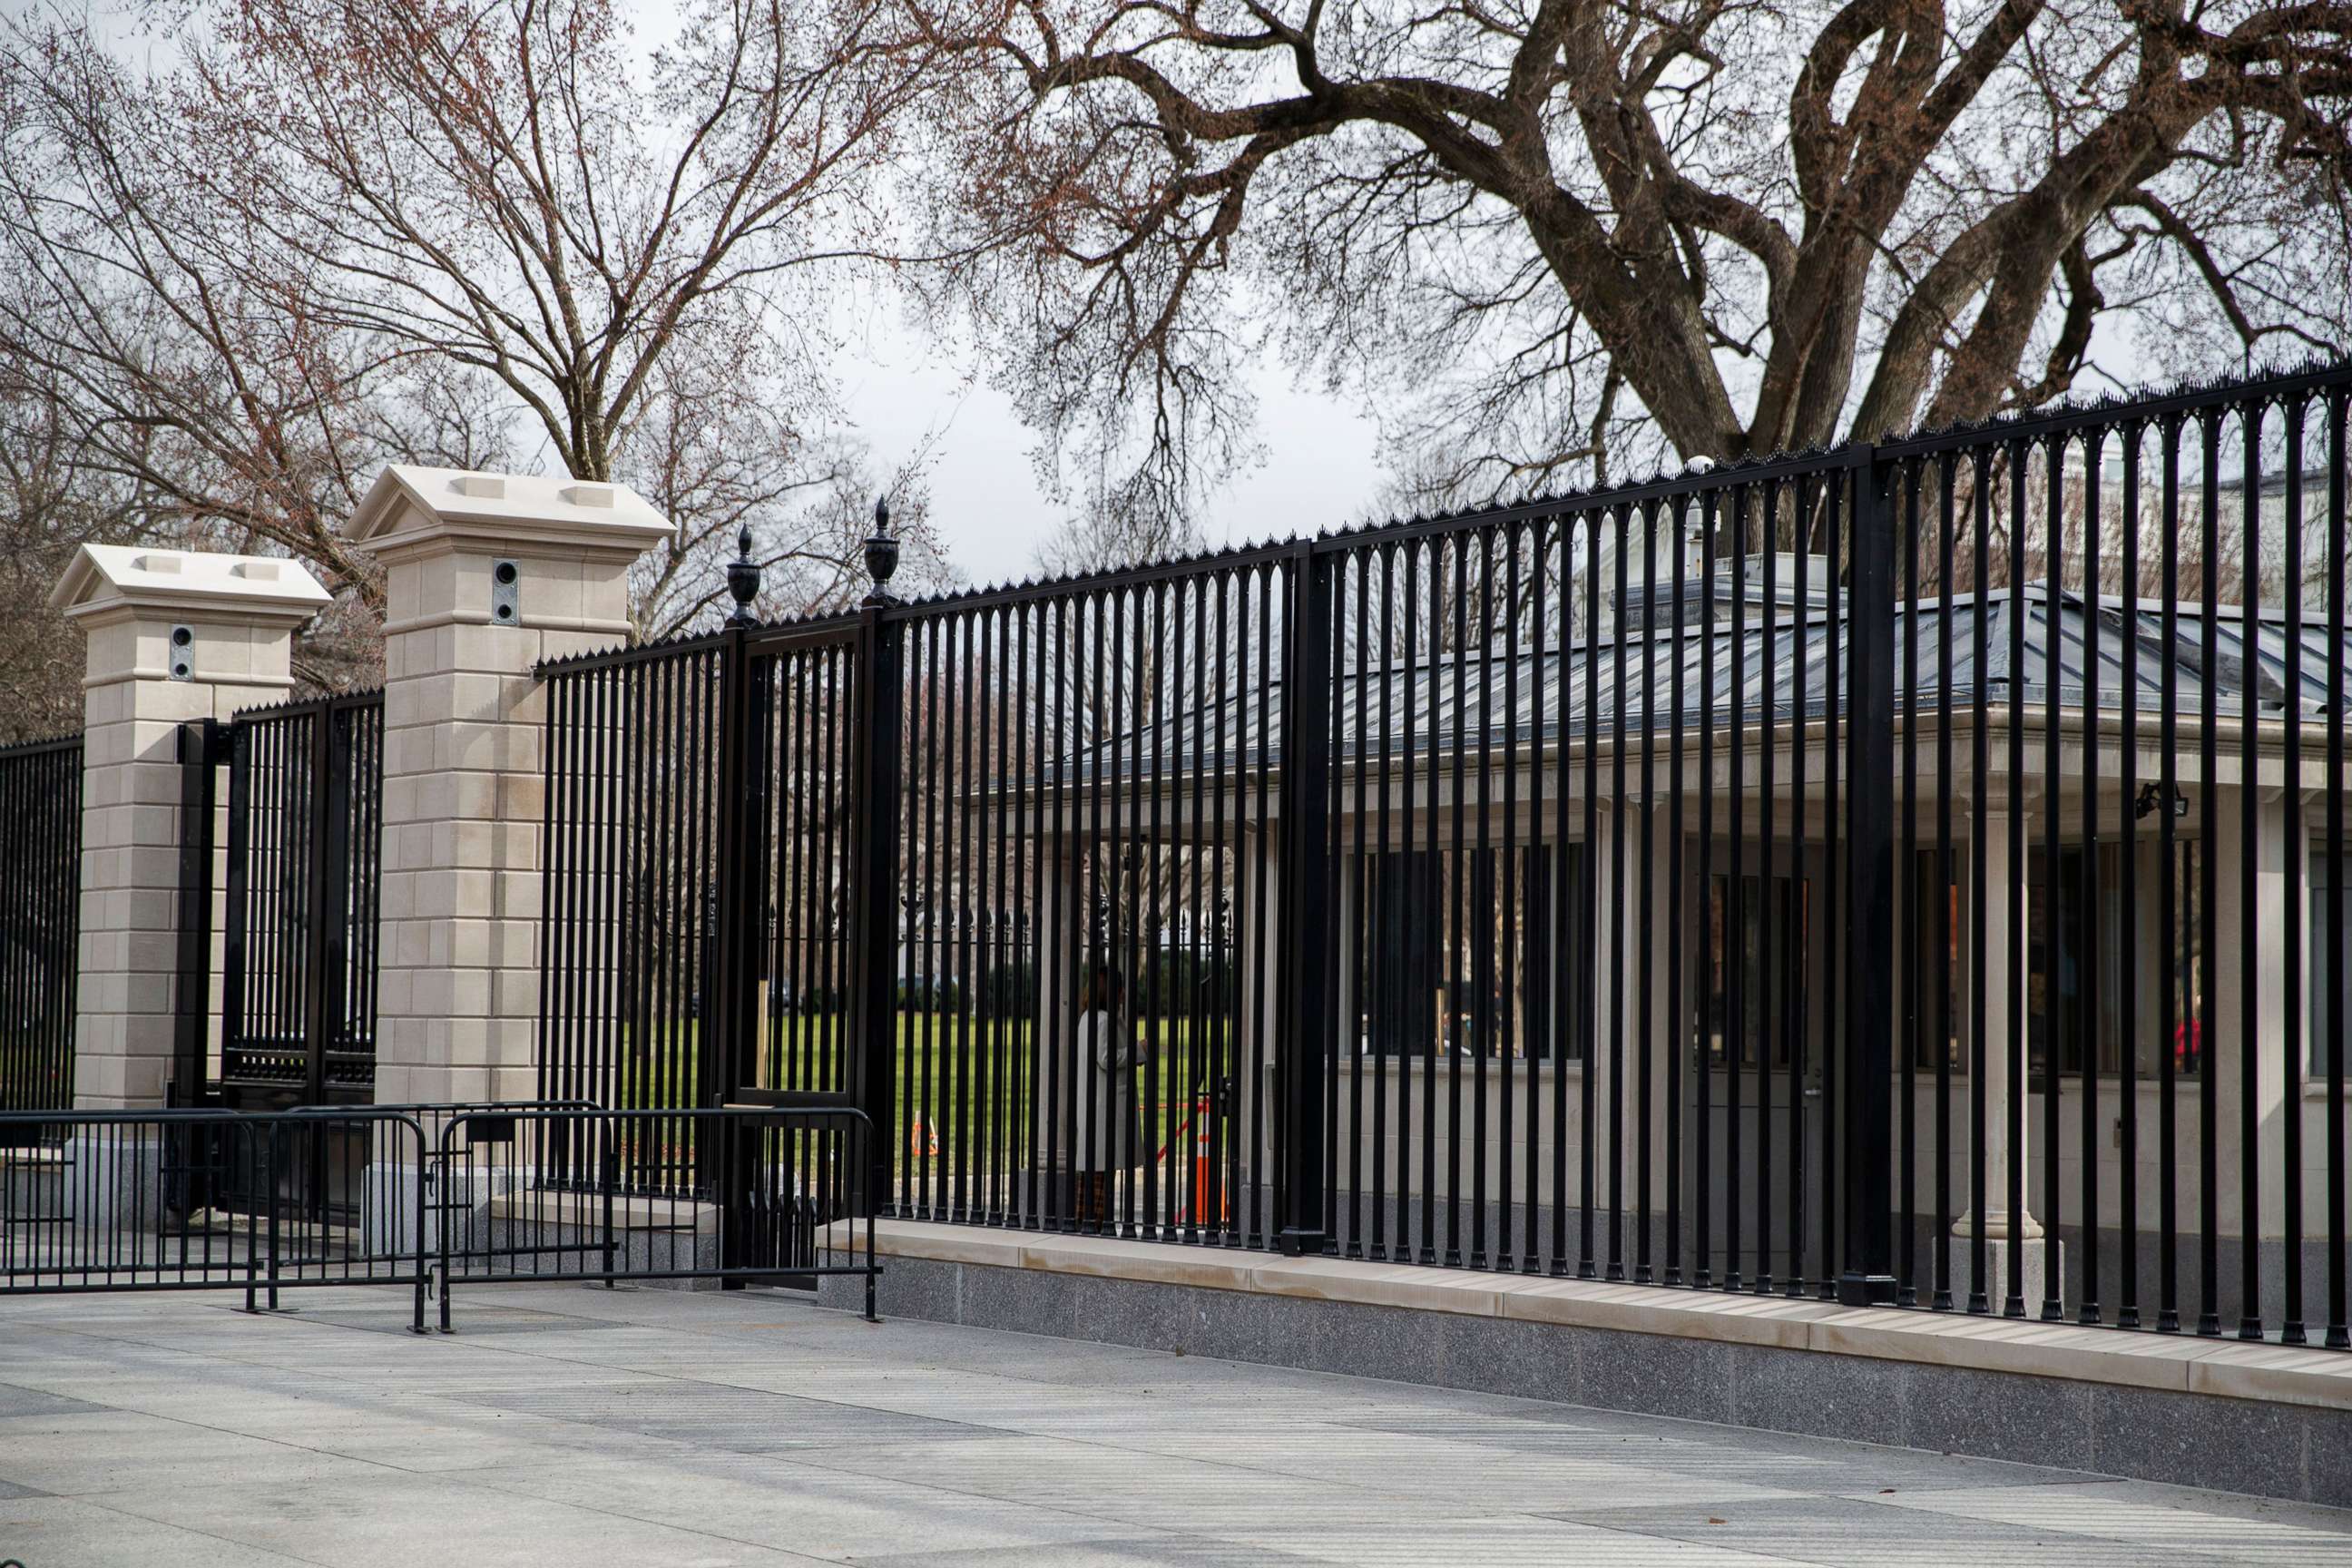 PHOTO: The gate and security on the northwest side of the White House, Feb. 24, 2020, in Washington, D.C.